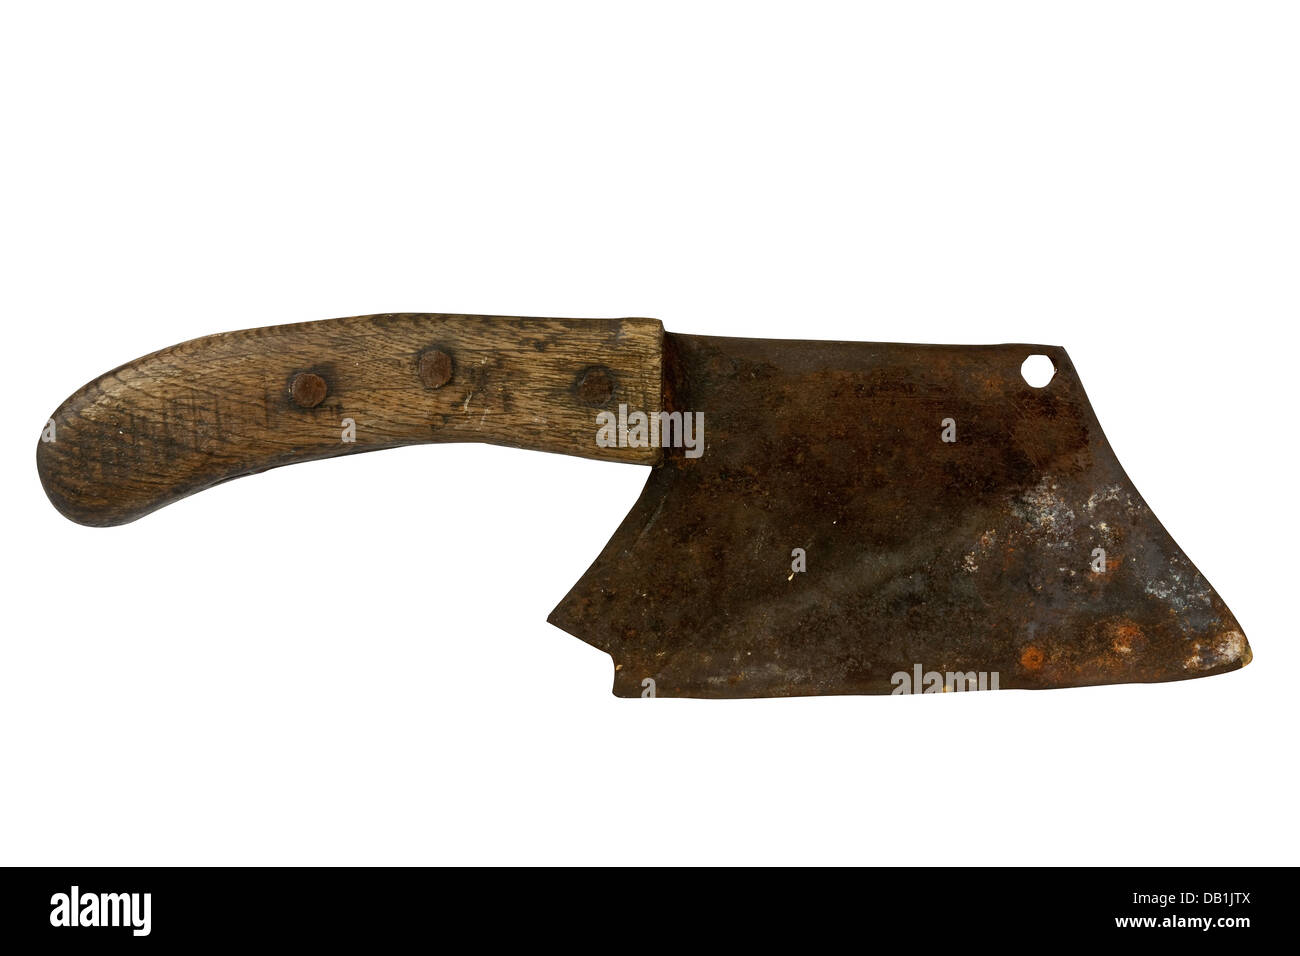 Rusty old butcher's cleaver Stock Photo